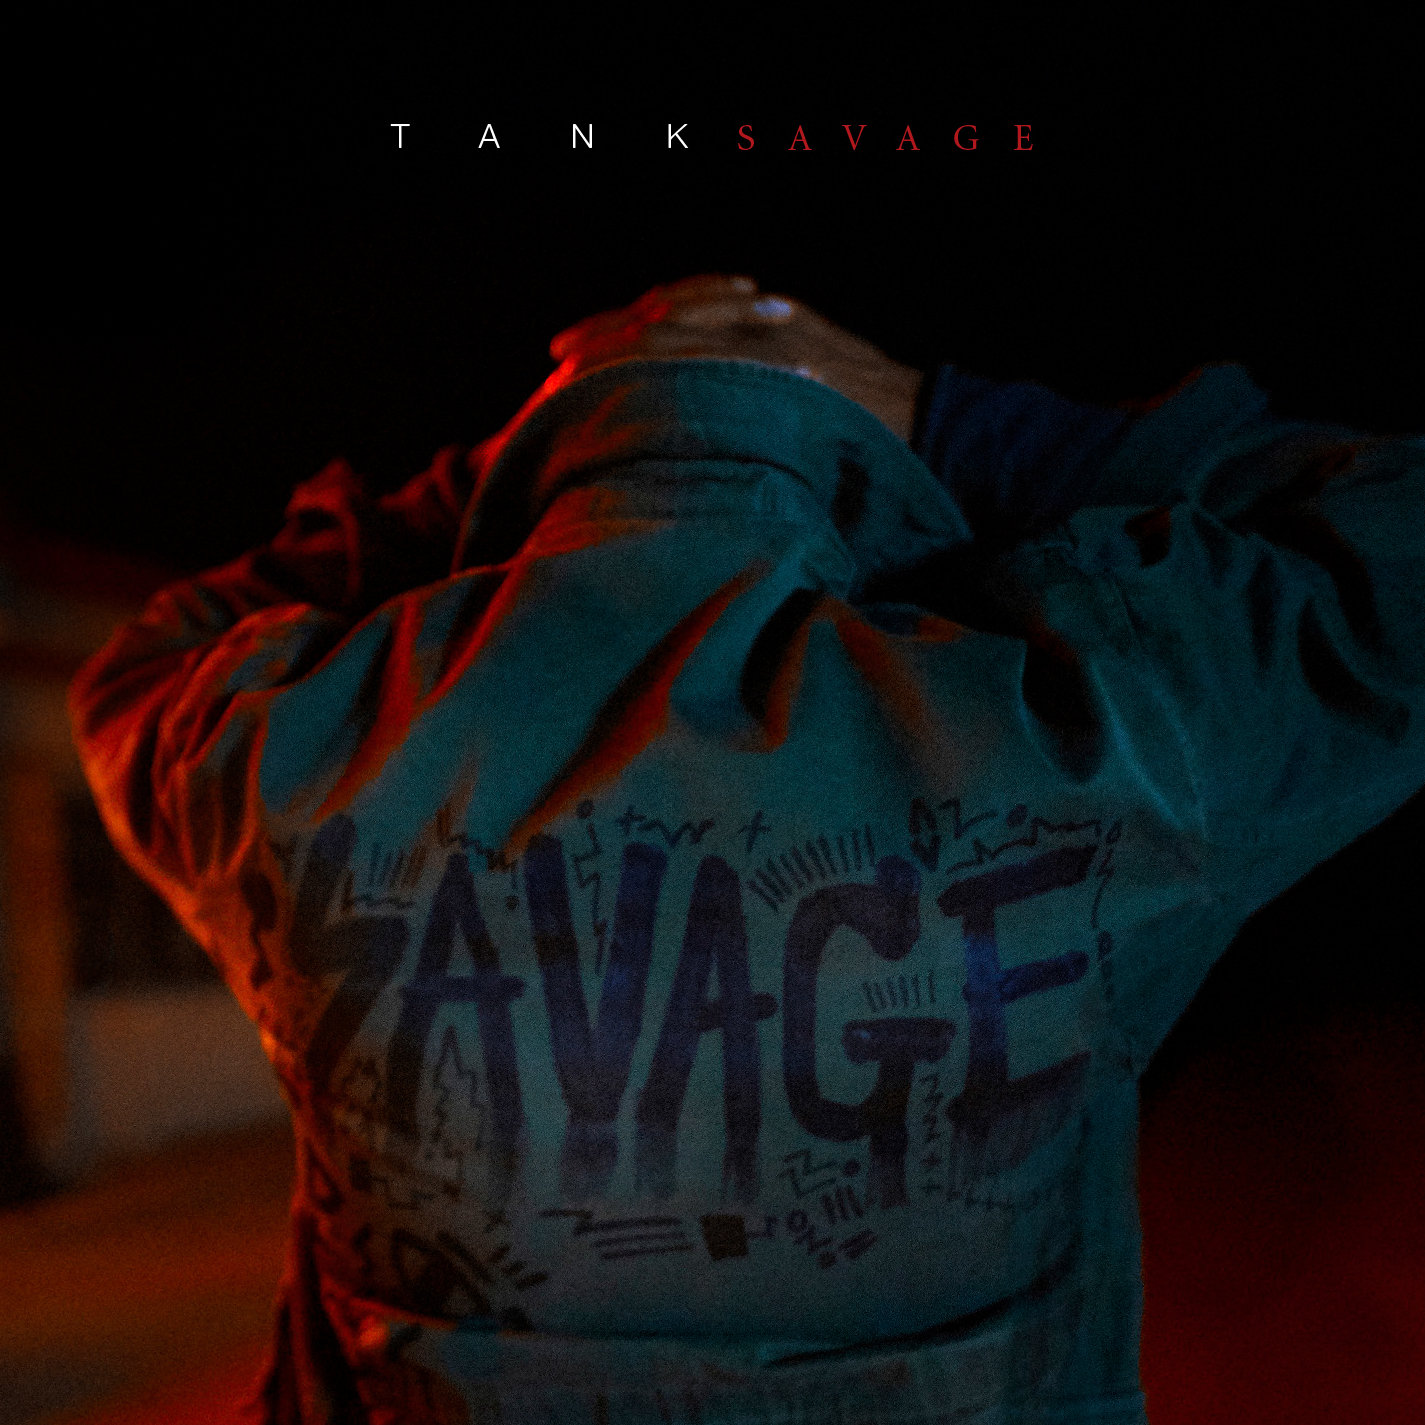 Tank Reveals Cover Art & Release Date of Upcoming Album "Savage"